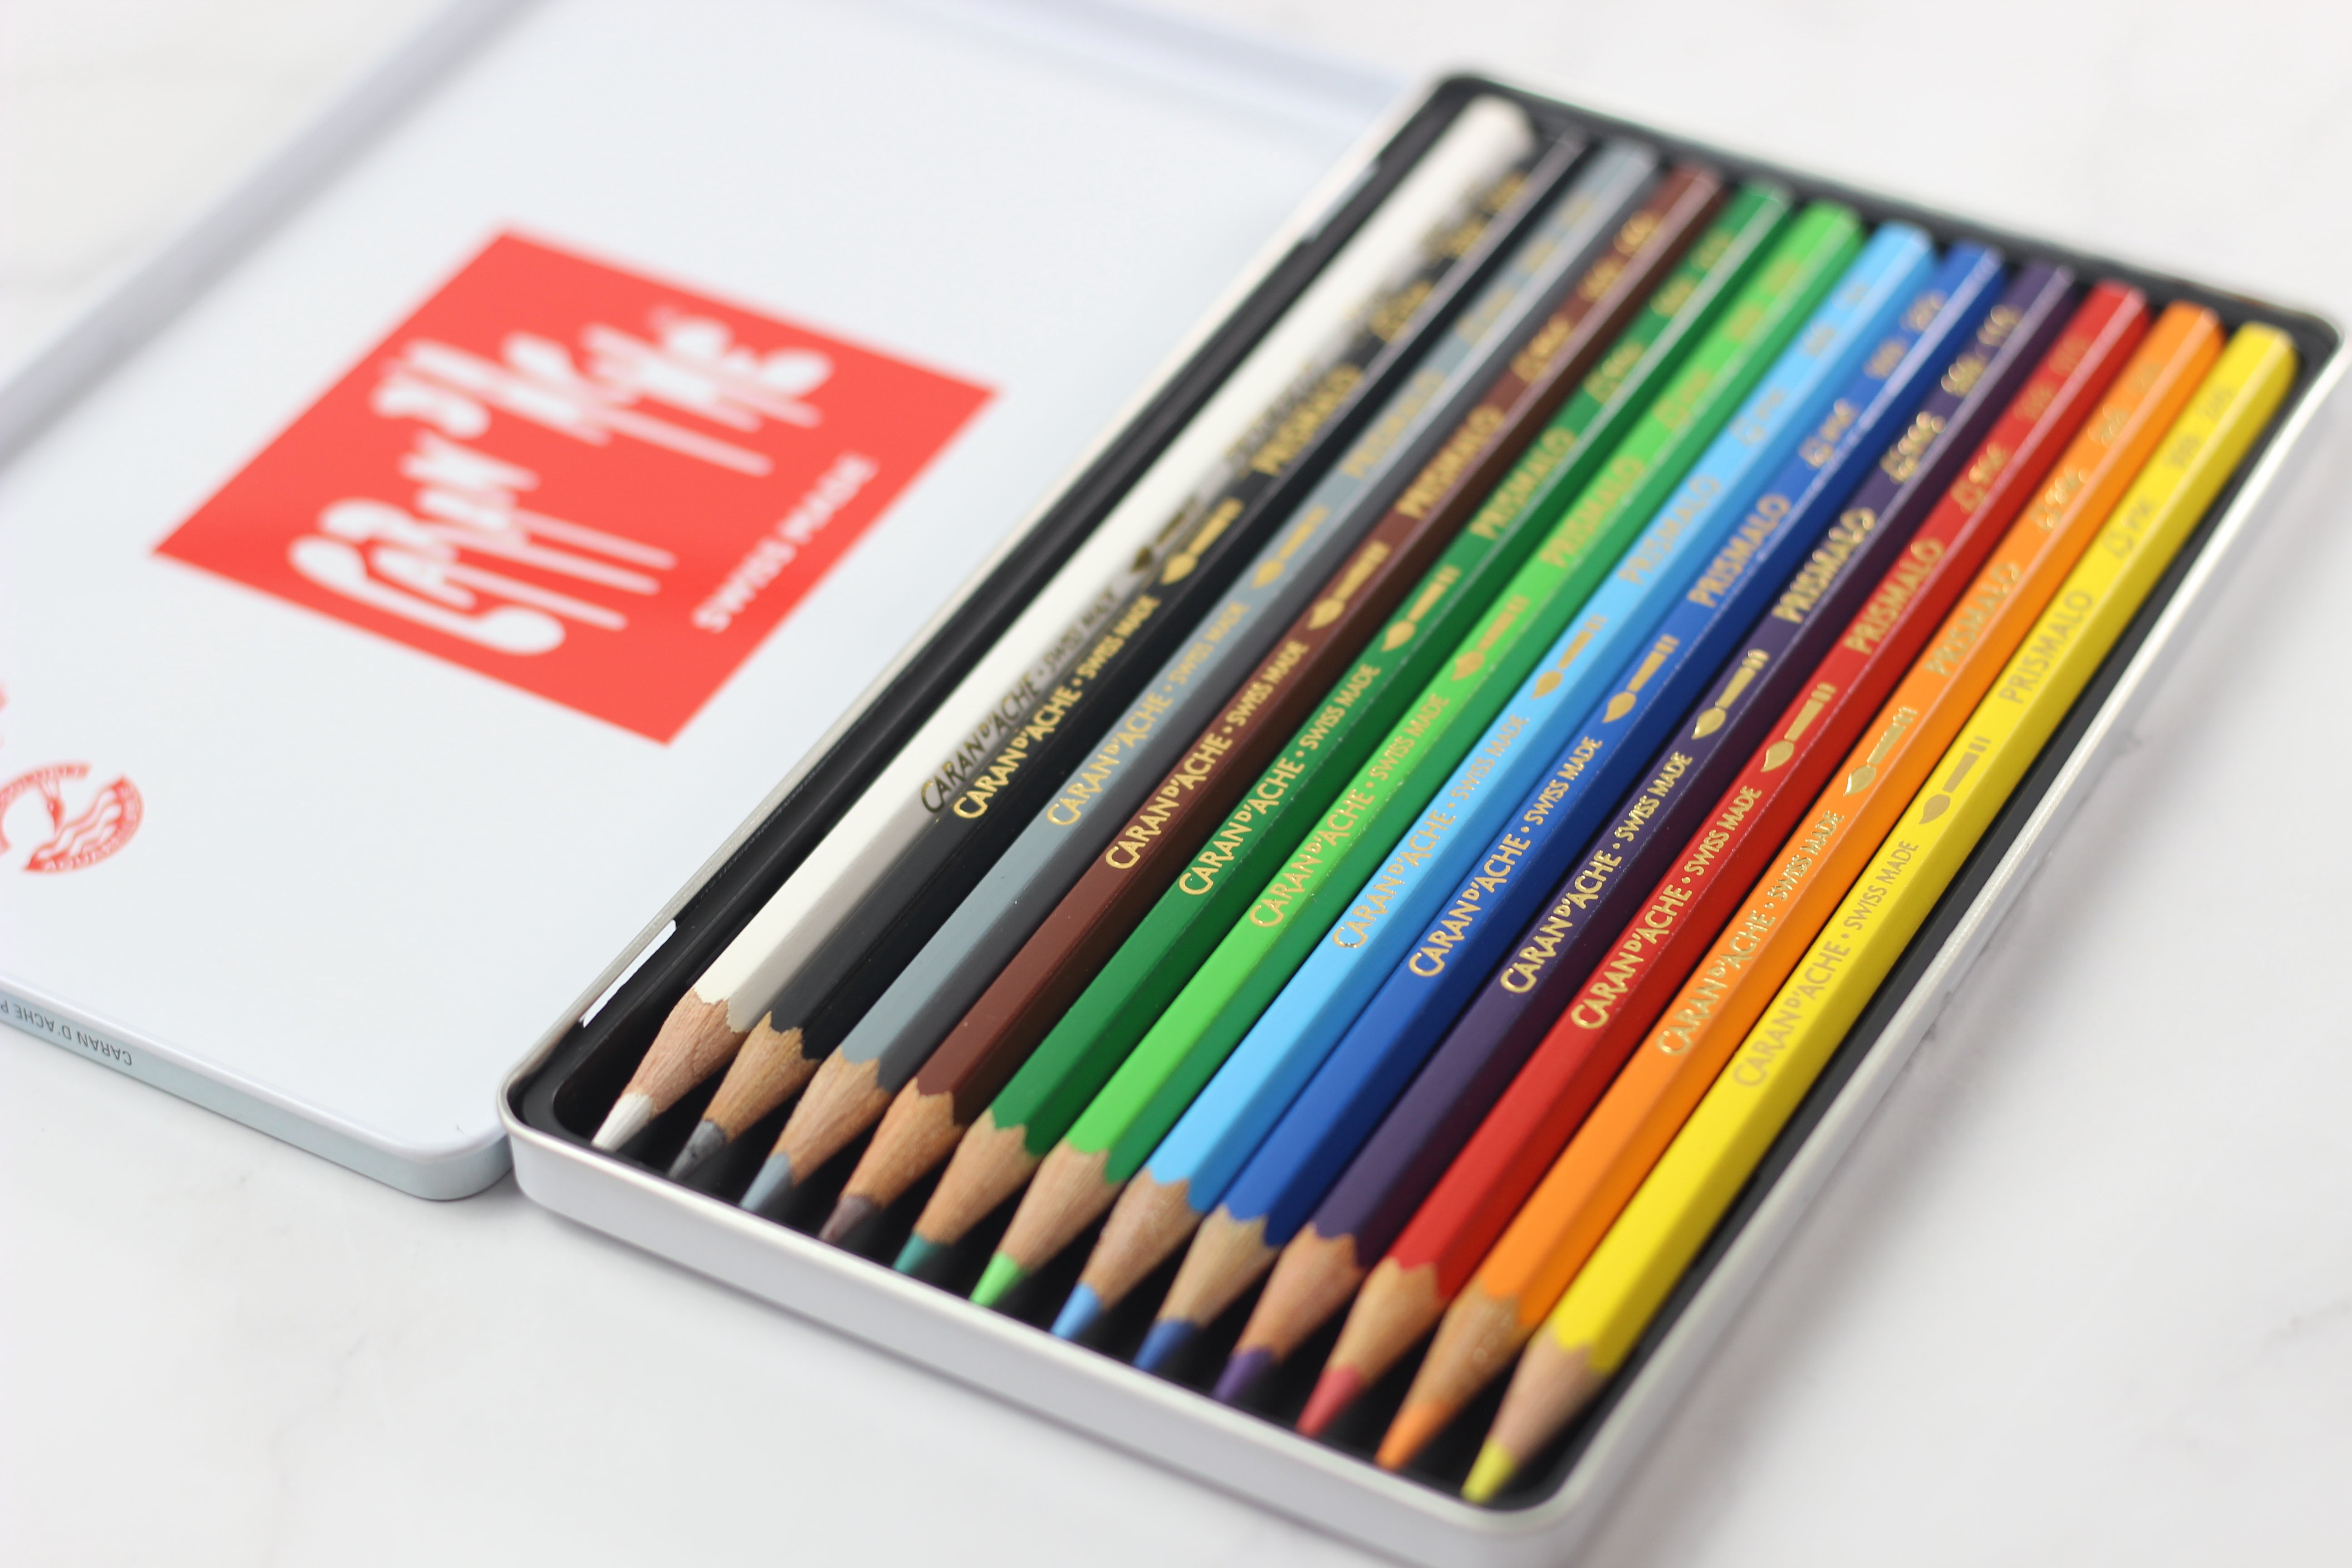 Colored pencils: Creative coloring fun for artists big and small